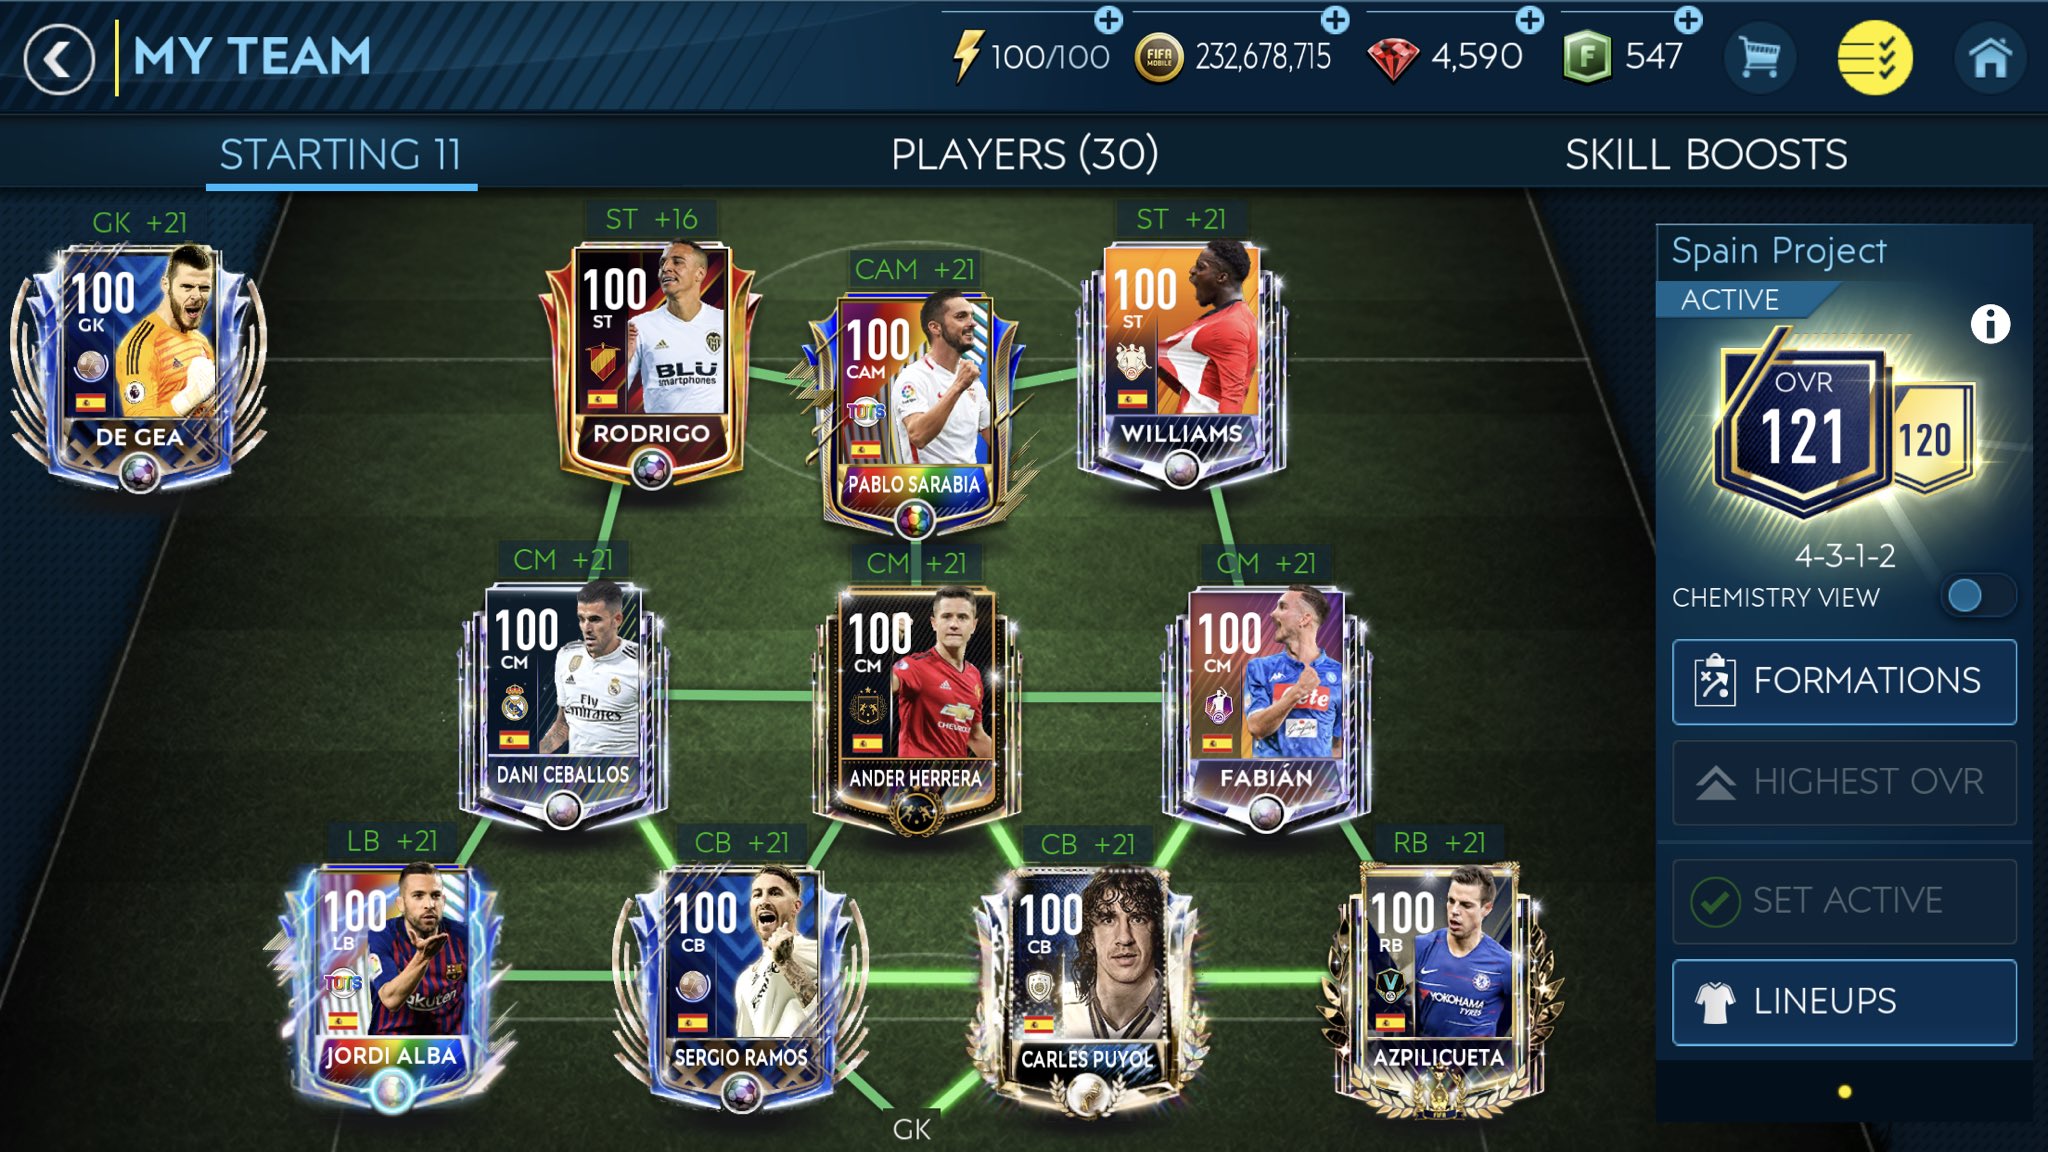 John Fernandez Week 40 Of Fifamobile Fifa19 Squadshowoffsunday 3 Ru3s And 8 Ru2s For 25 3rds 8 1 3 4 Transitioned To A 4 5 1 With The New Retro Players Right Now Just